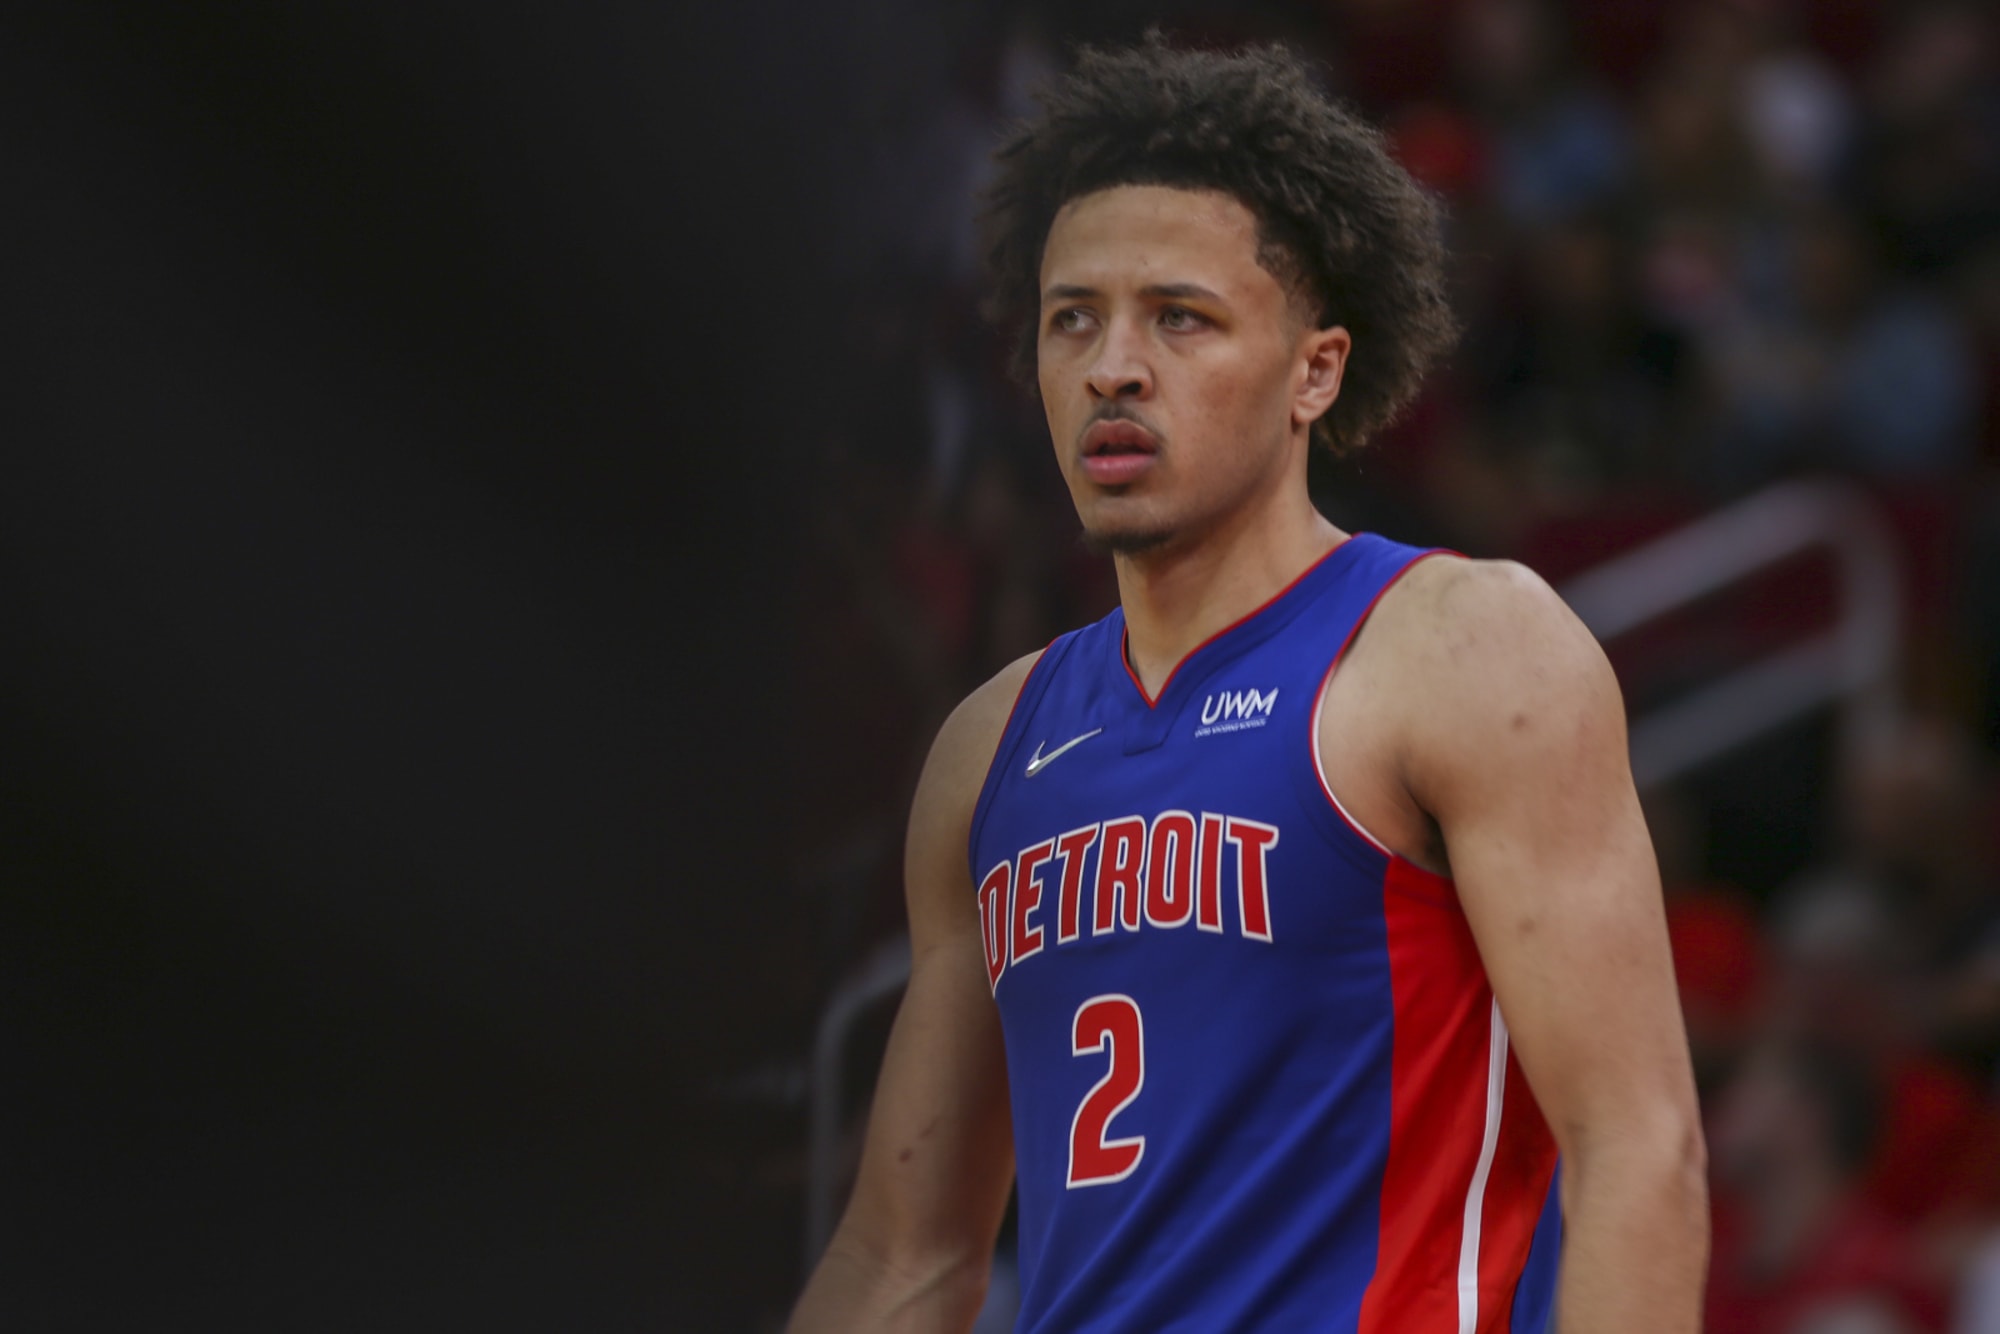 One Sports - Cade Cunningham to the Pistons? 👀 Who you got going to  Detroit as the no. 1 pick in the 2021 NBA Draft? 🤔 📷 SportsCenter